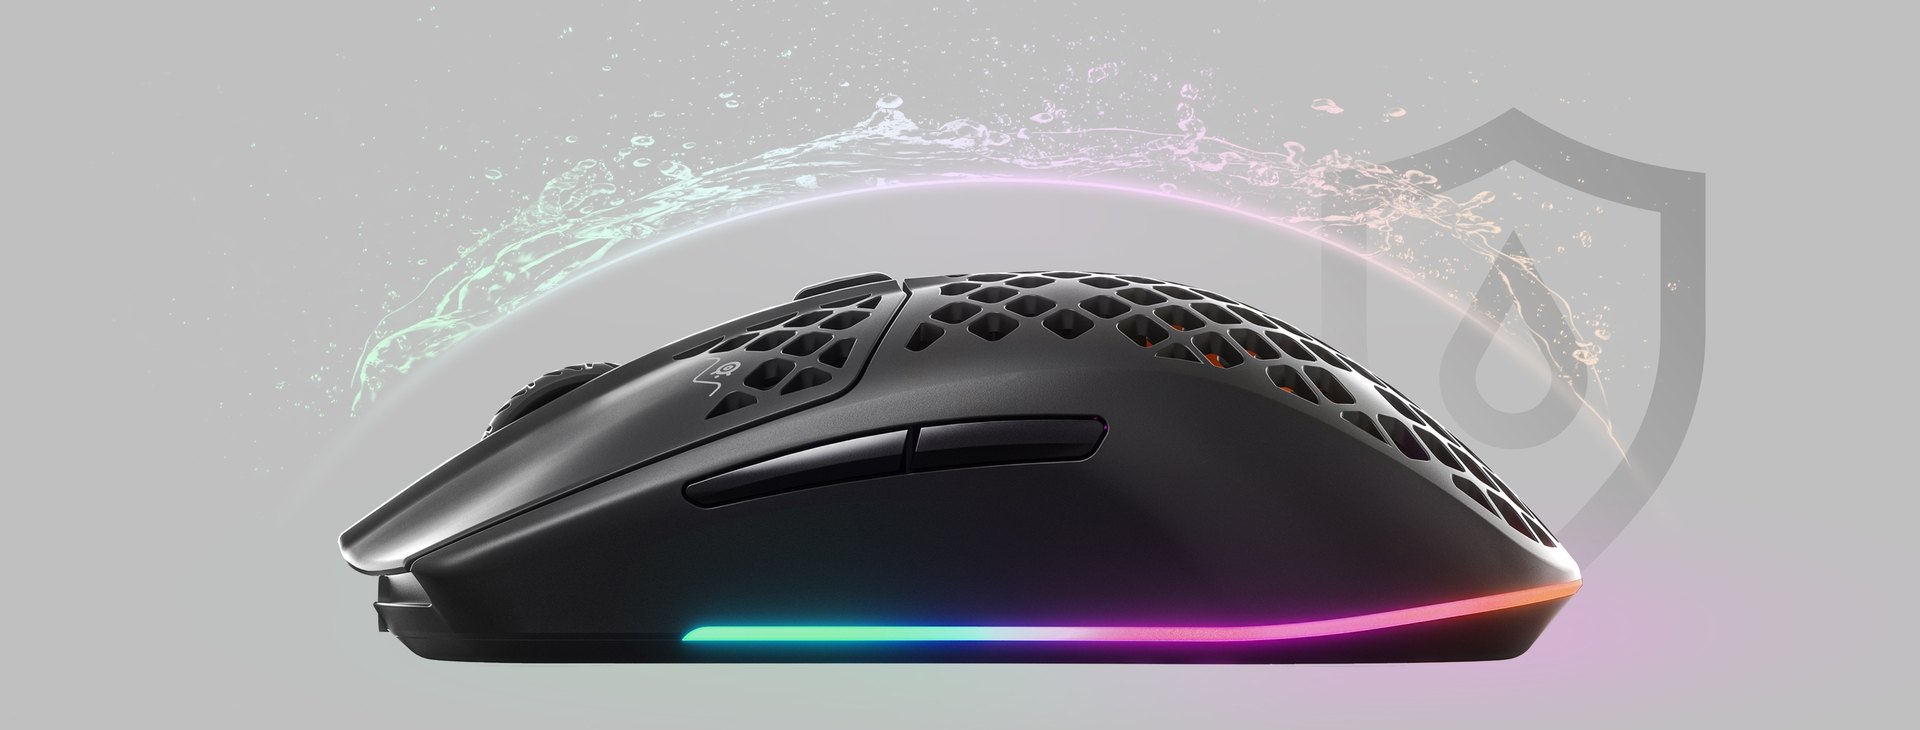 An Aerox 3 Wireless mouse with an invisible shield protecting it from incoming water splashing, to convey the waterproofing features.